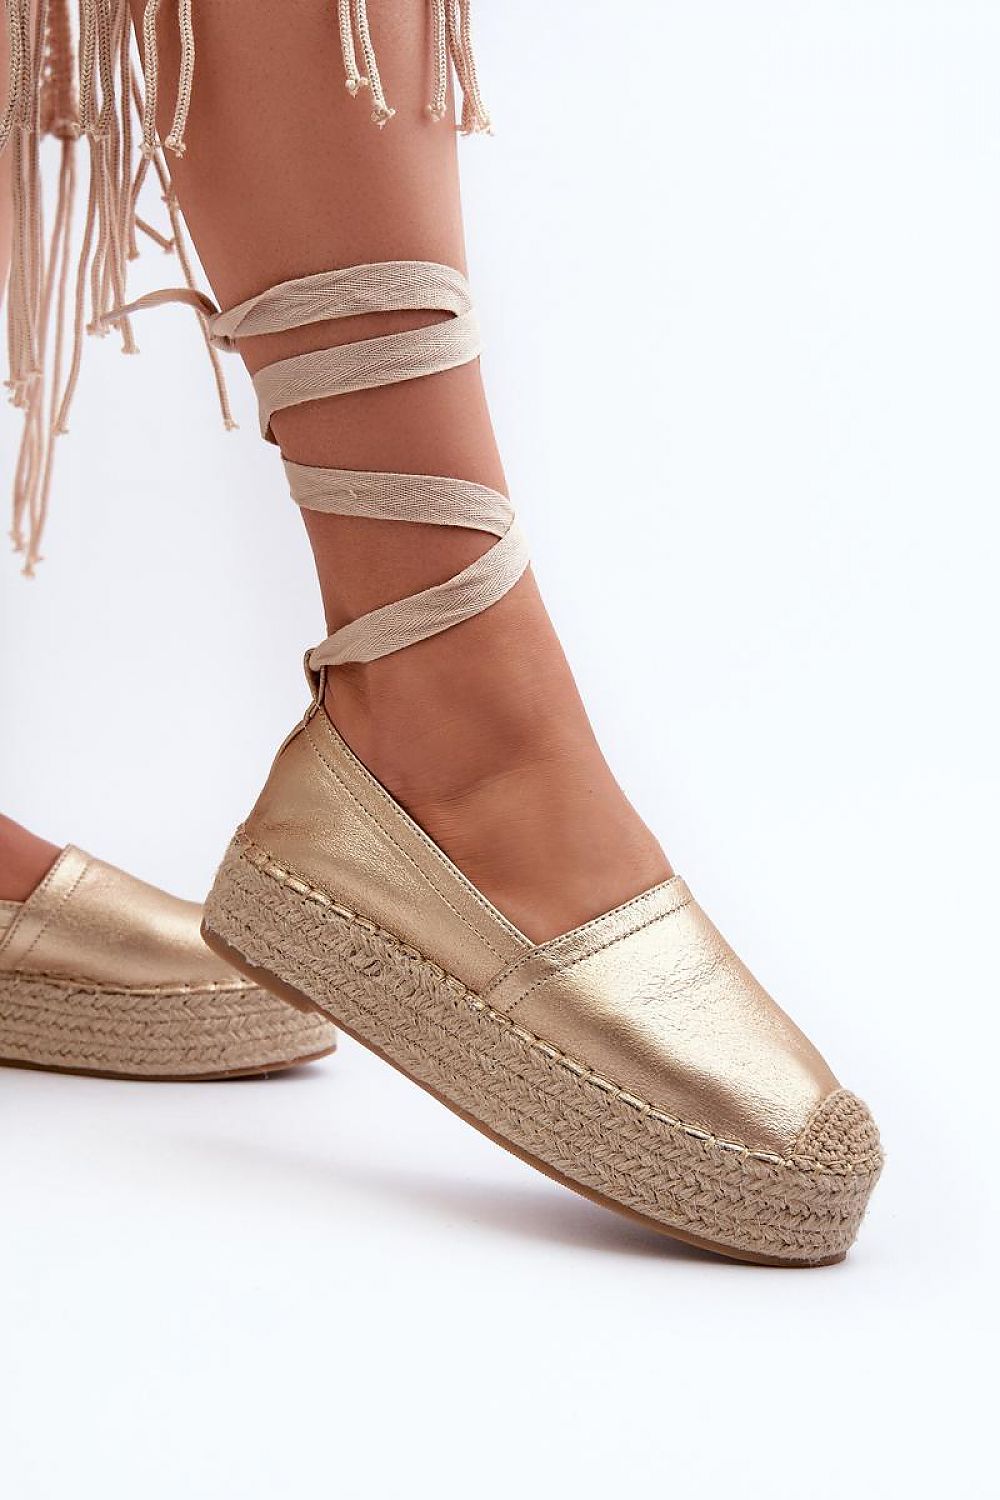 Women's Step in Style Gold Espadrille Platform Sandals with Lace-up Design